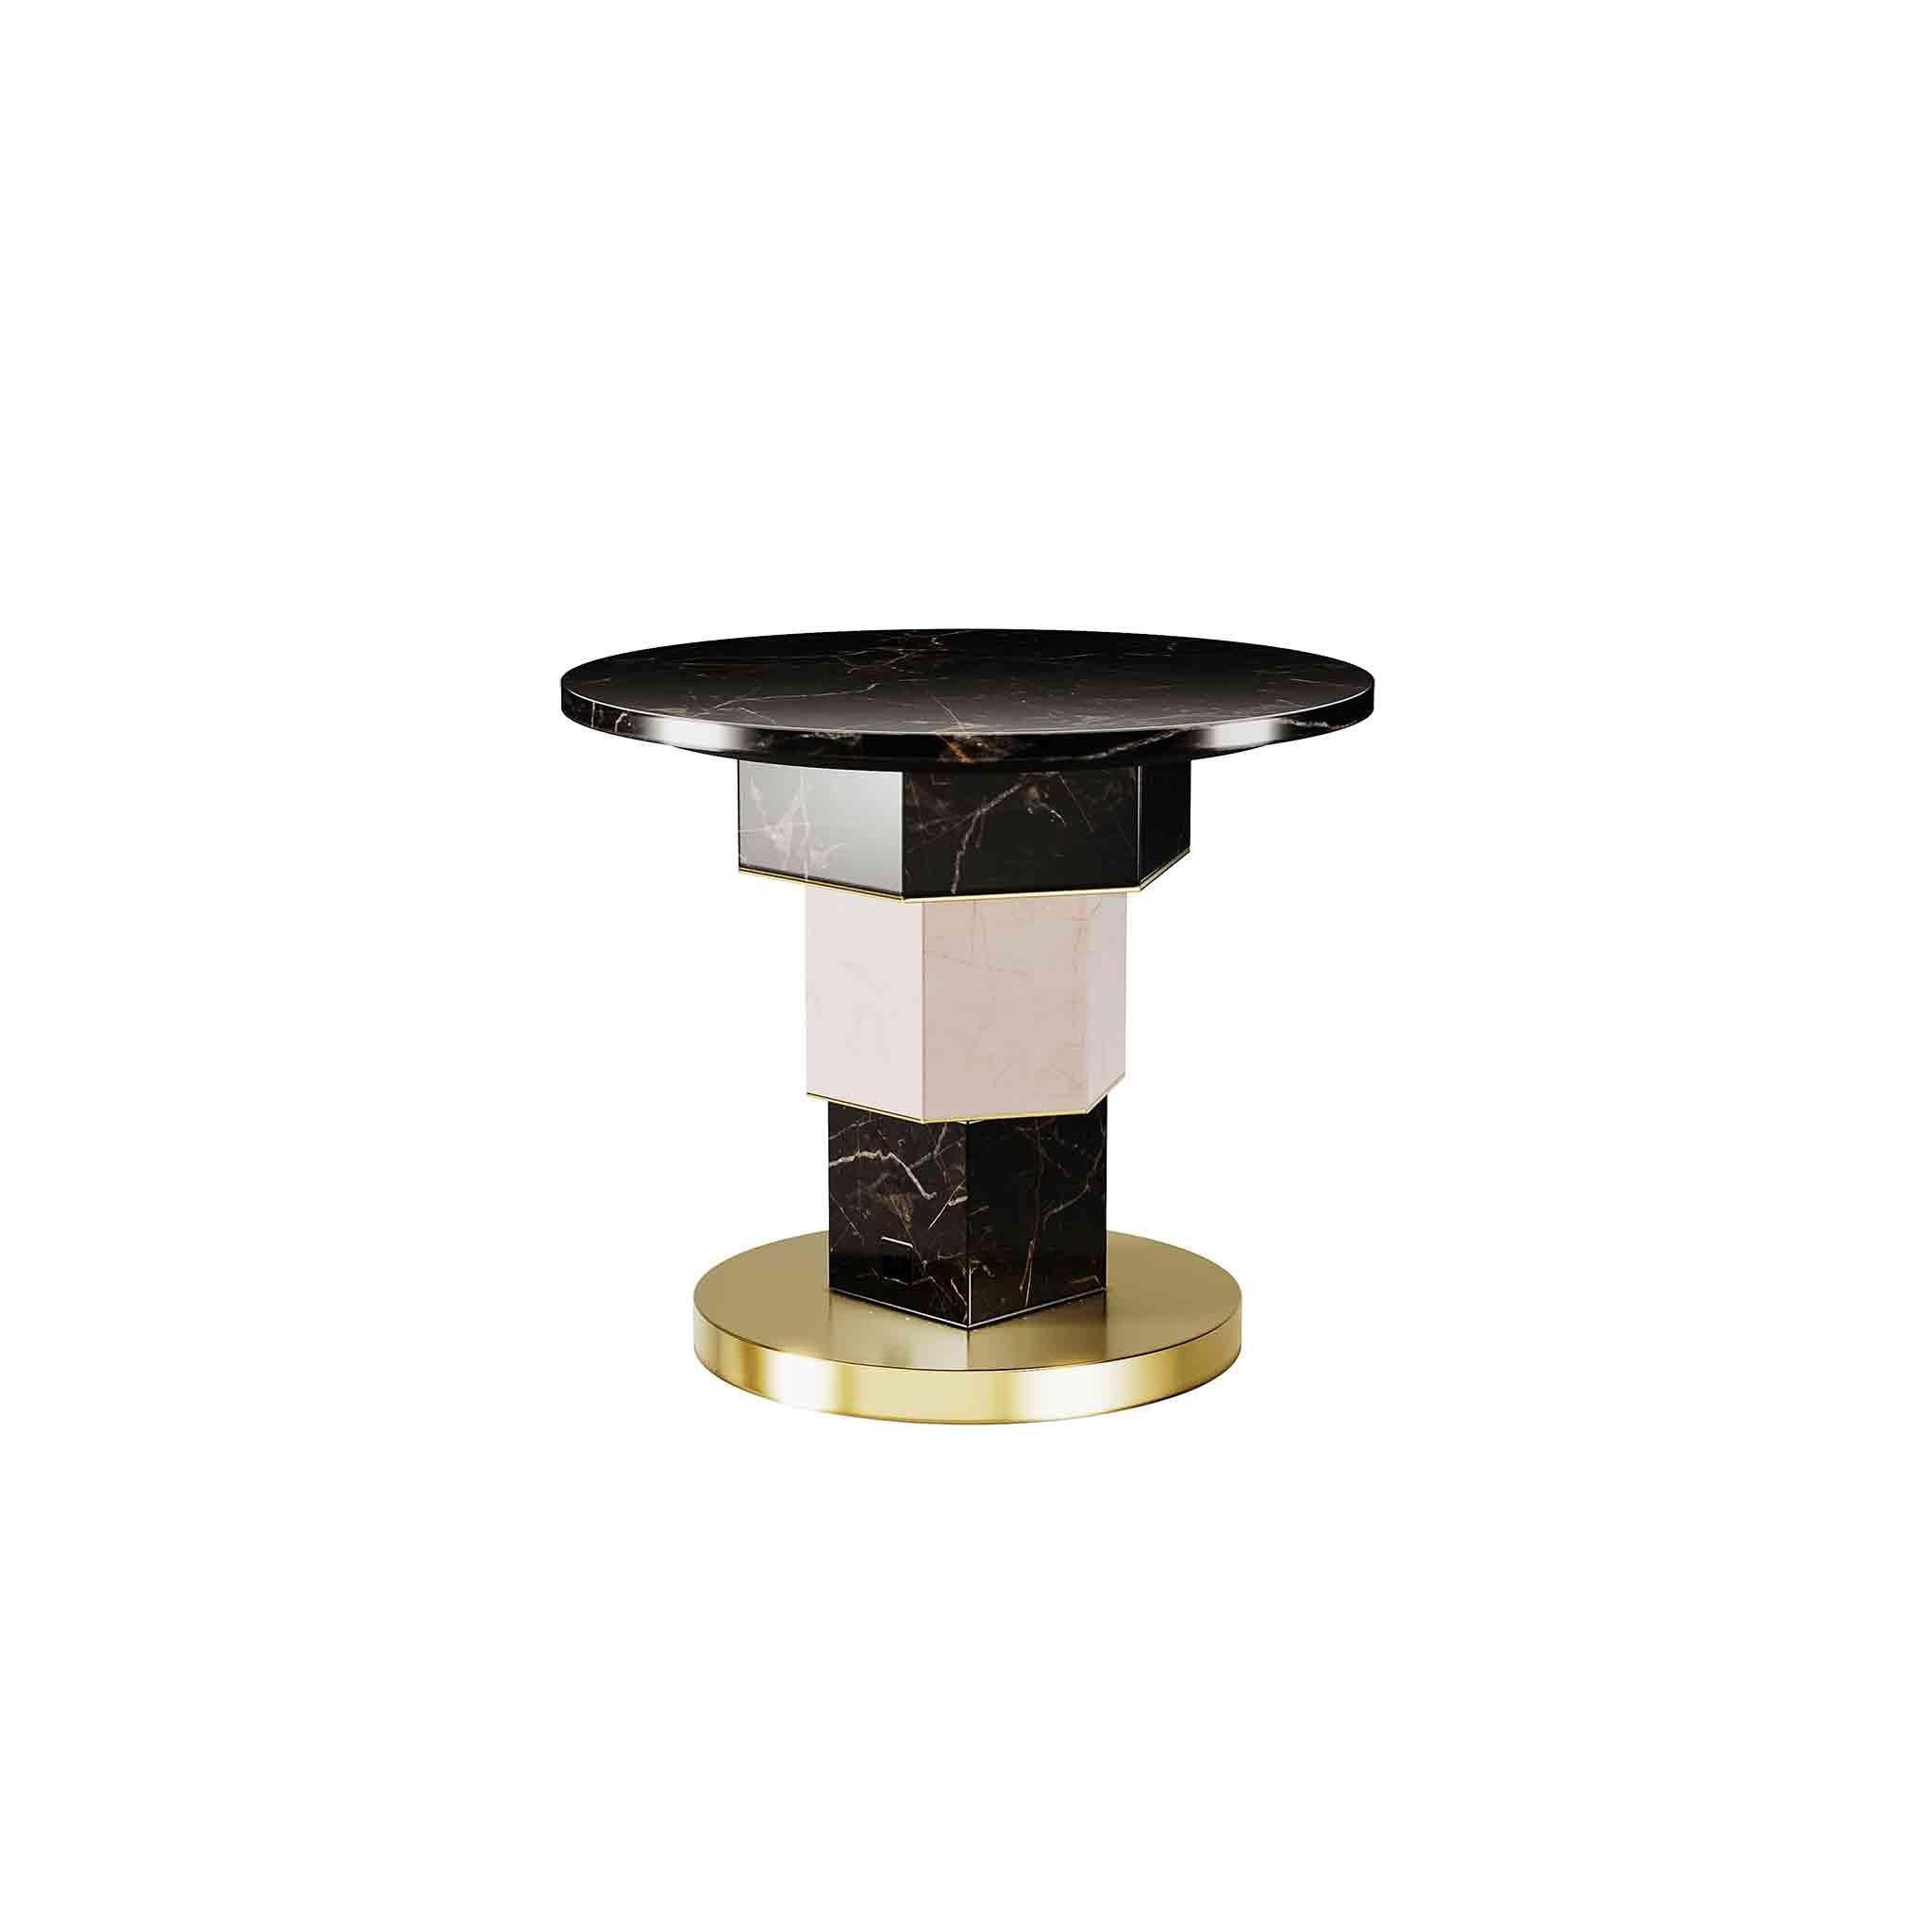 Portuguese Modern Geometric Round Side Table Memphis Design Style Black and Pink Marble For Sale